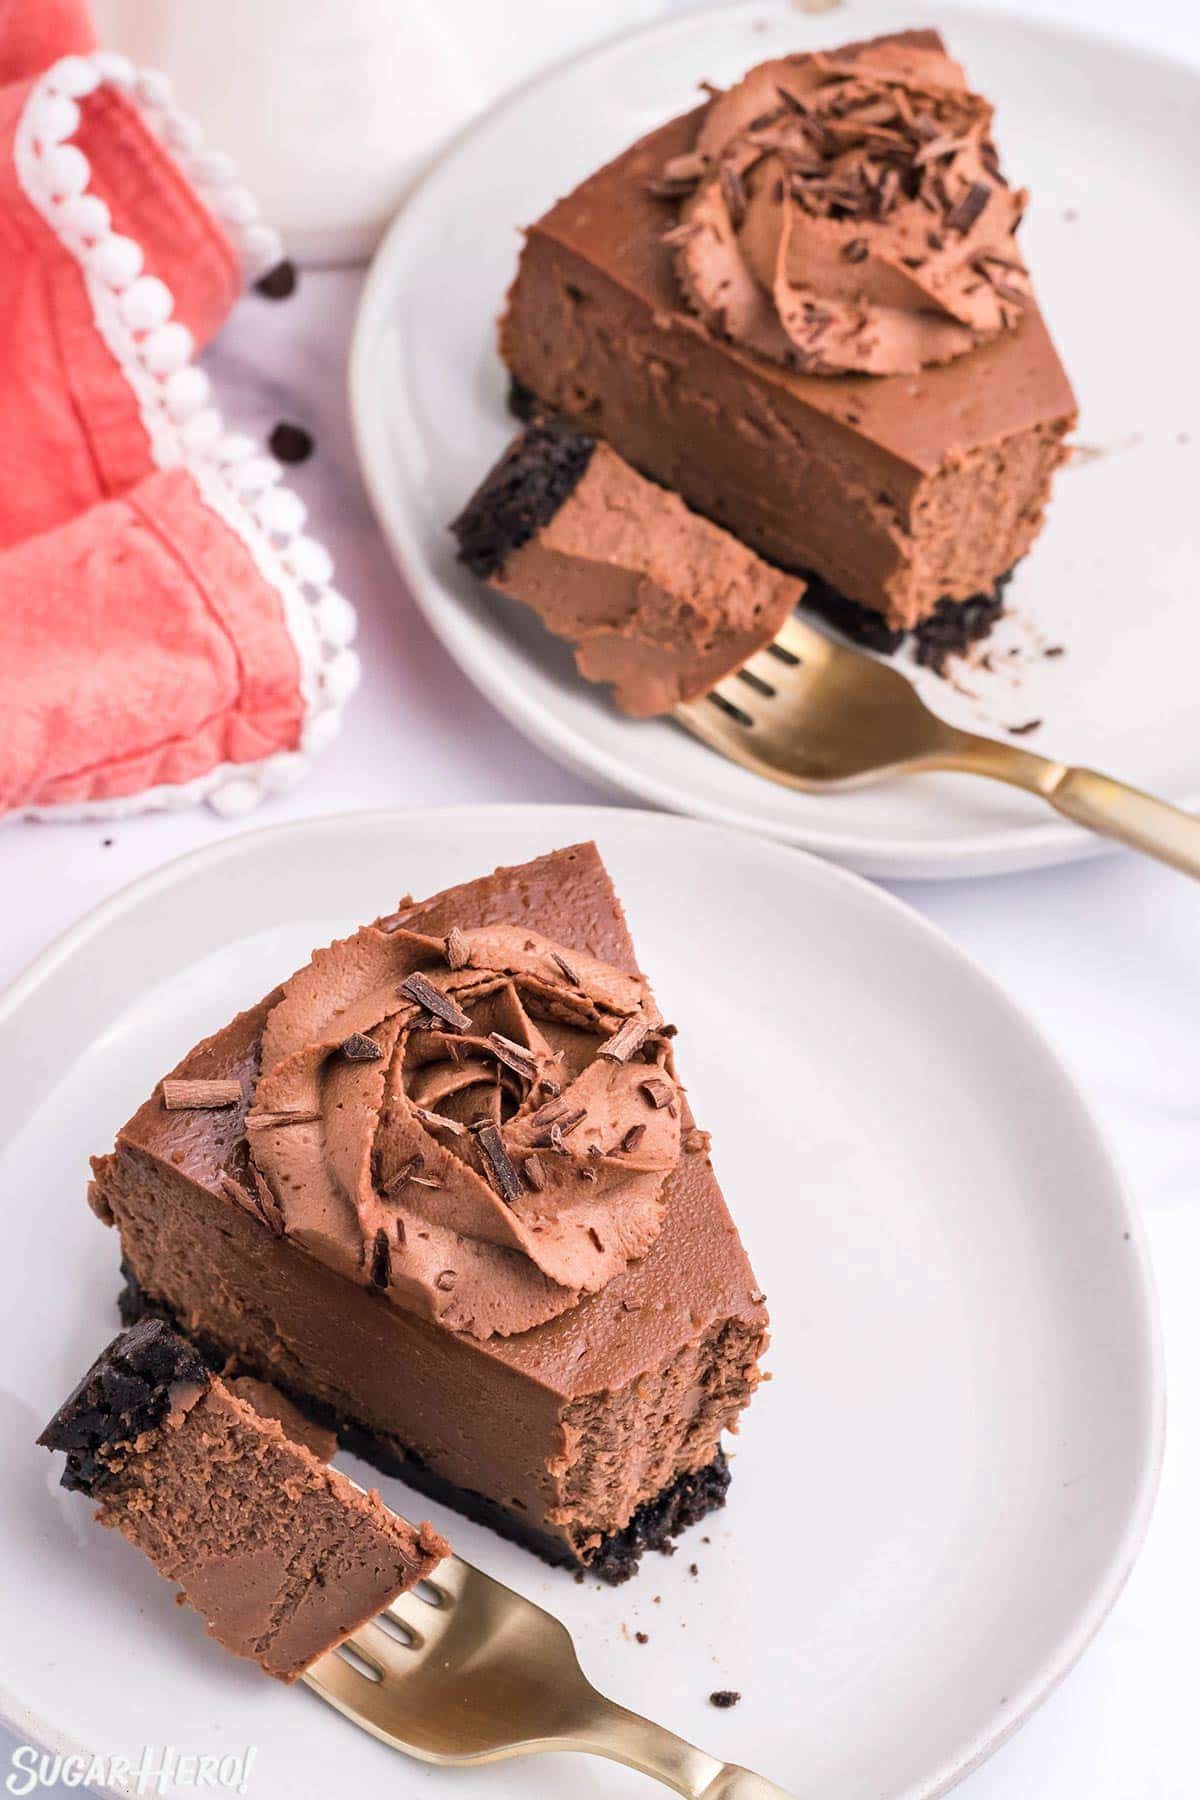 2 slices of Chocolate Cheesecake on white plates with forks holding bites of cheesecake to show texture.